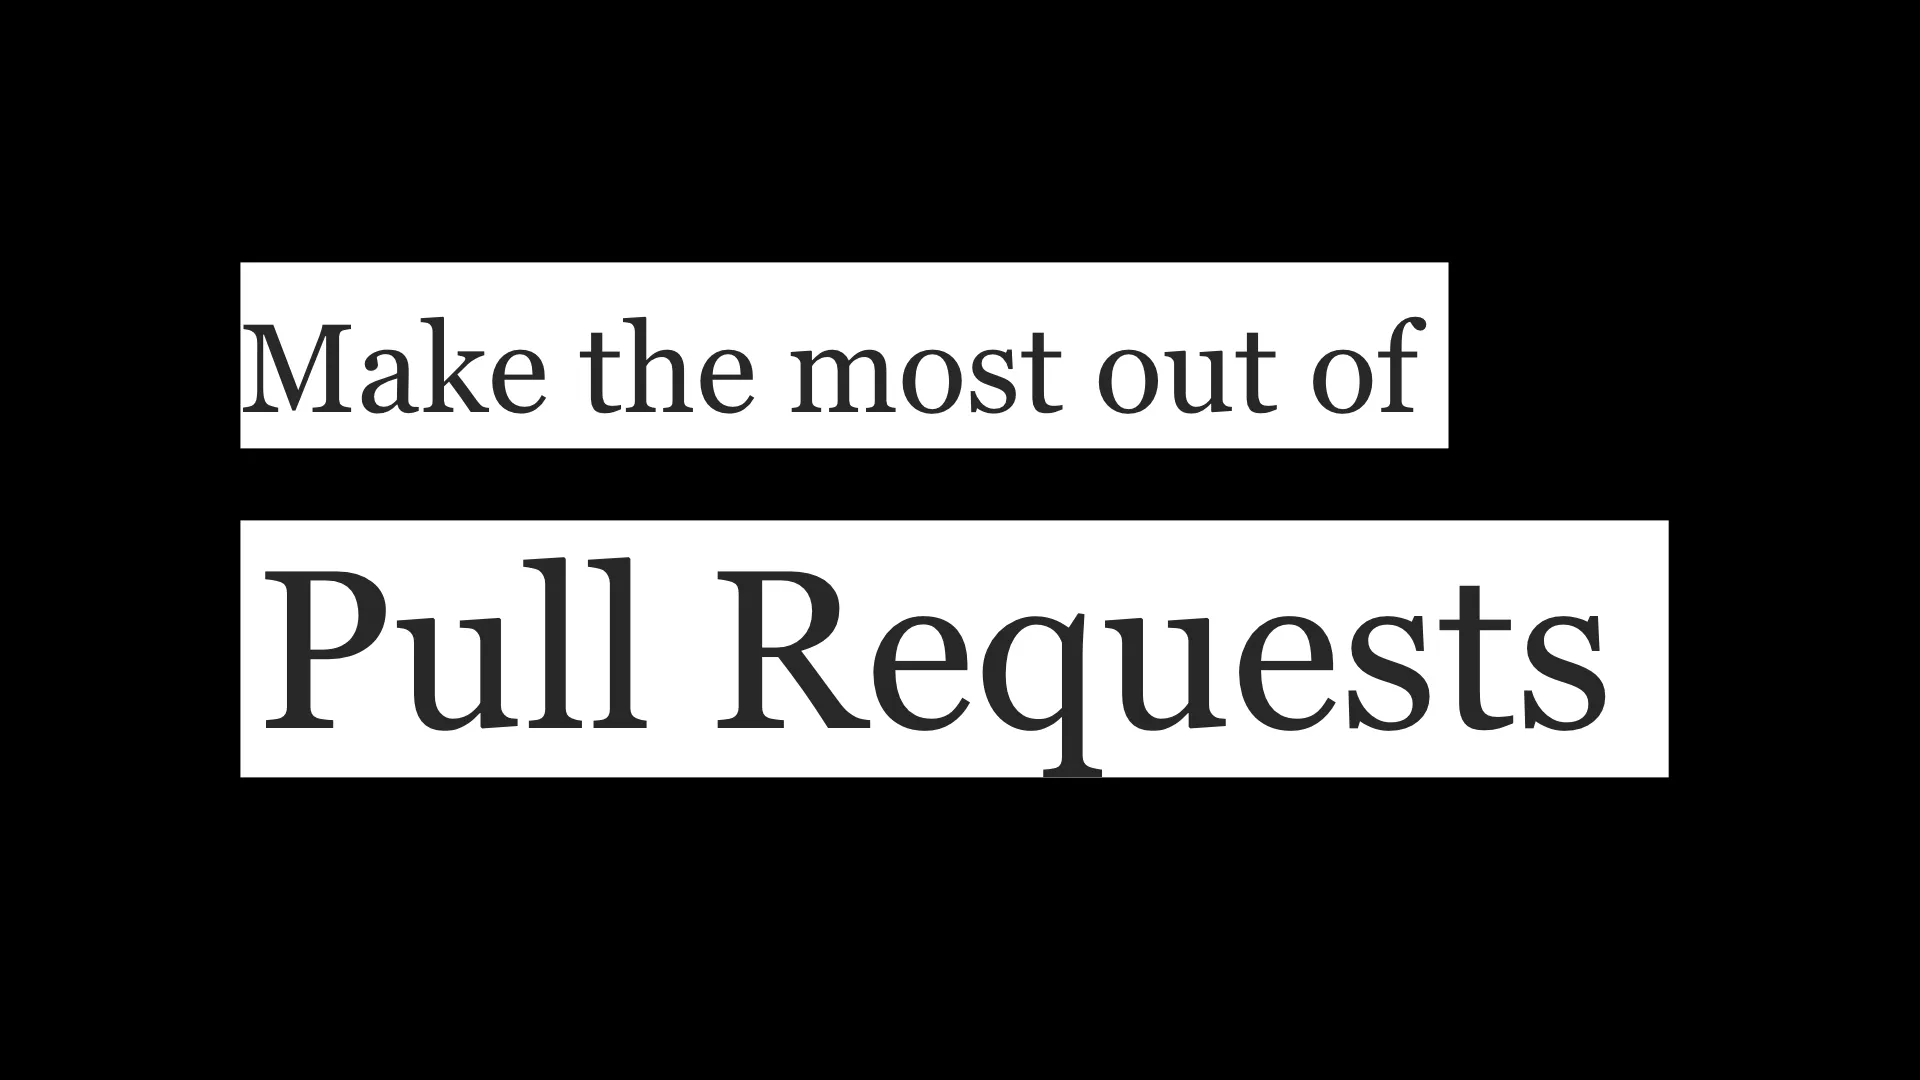 Make the most out of pull requests